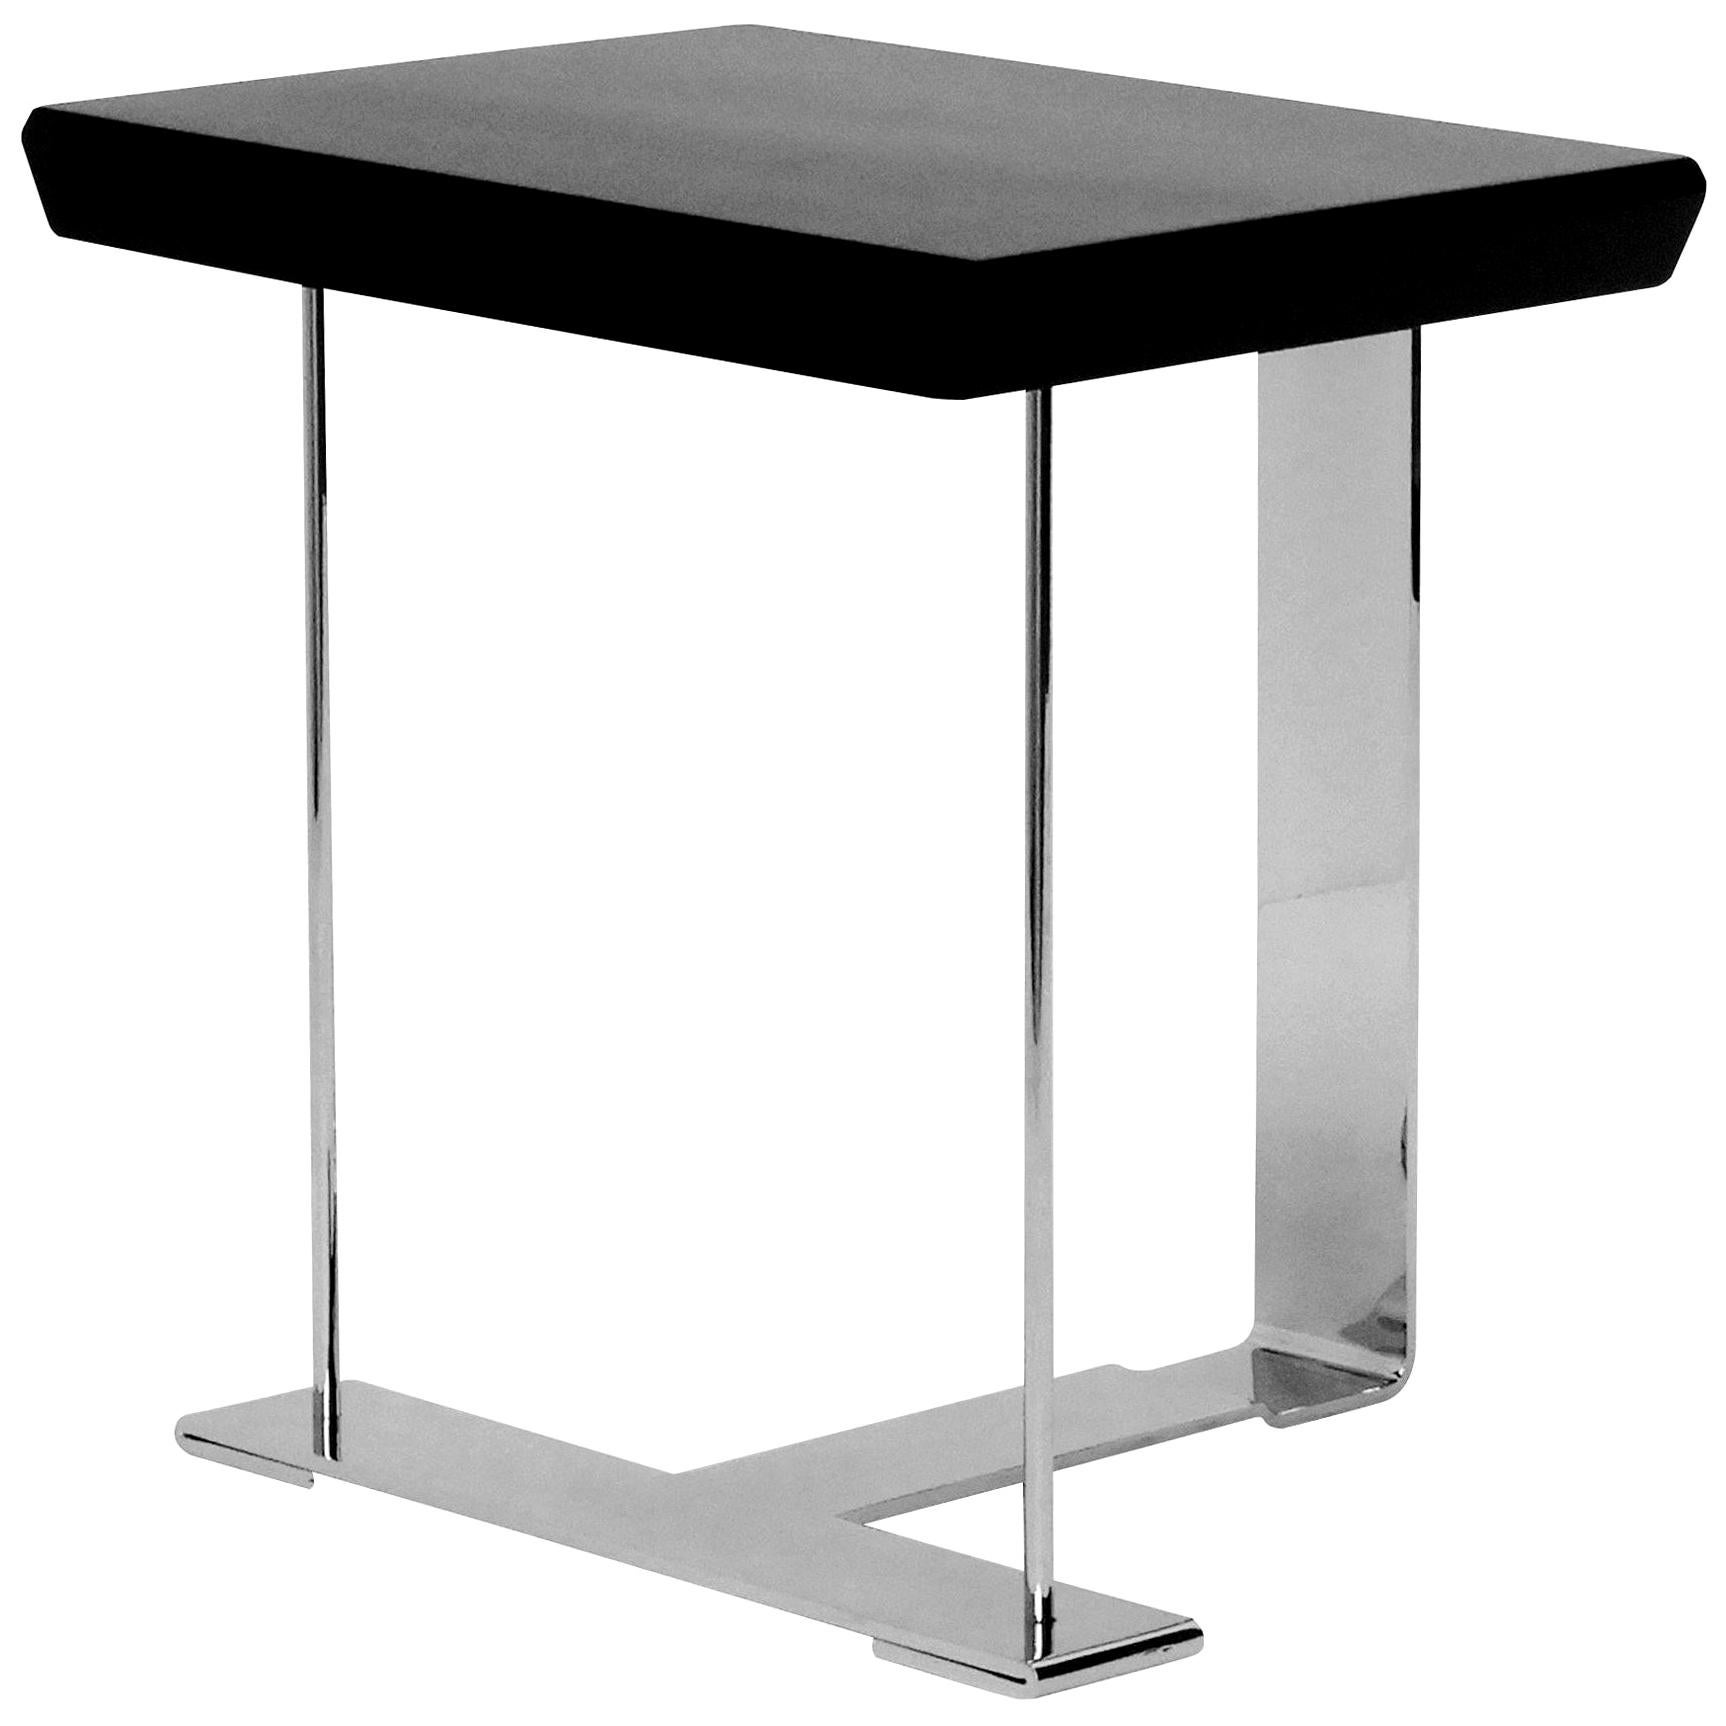 'MS' Wood and Chrome Table in the Manner of Pierre Chareau